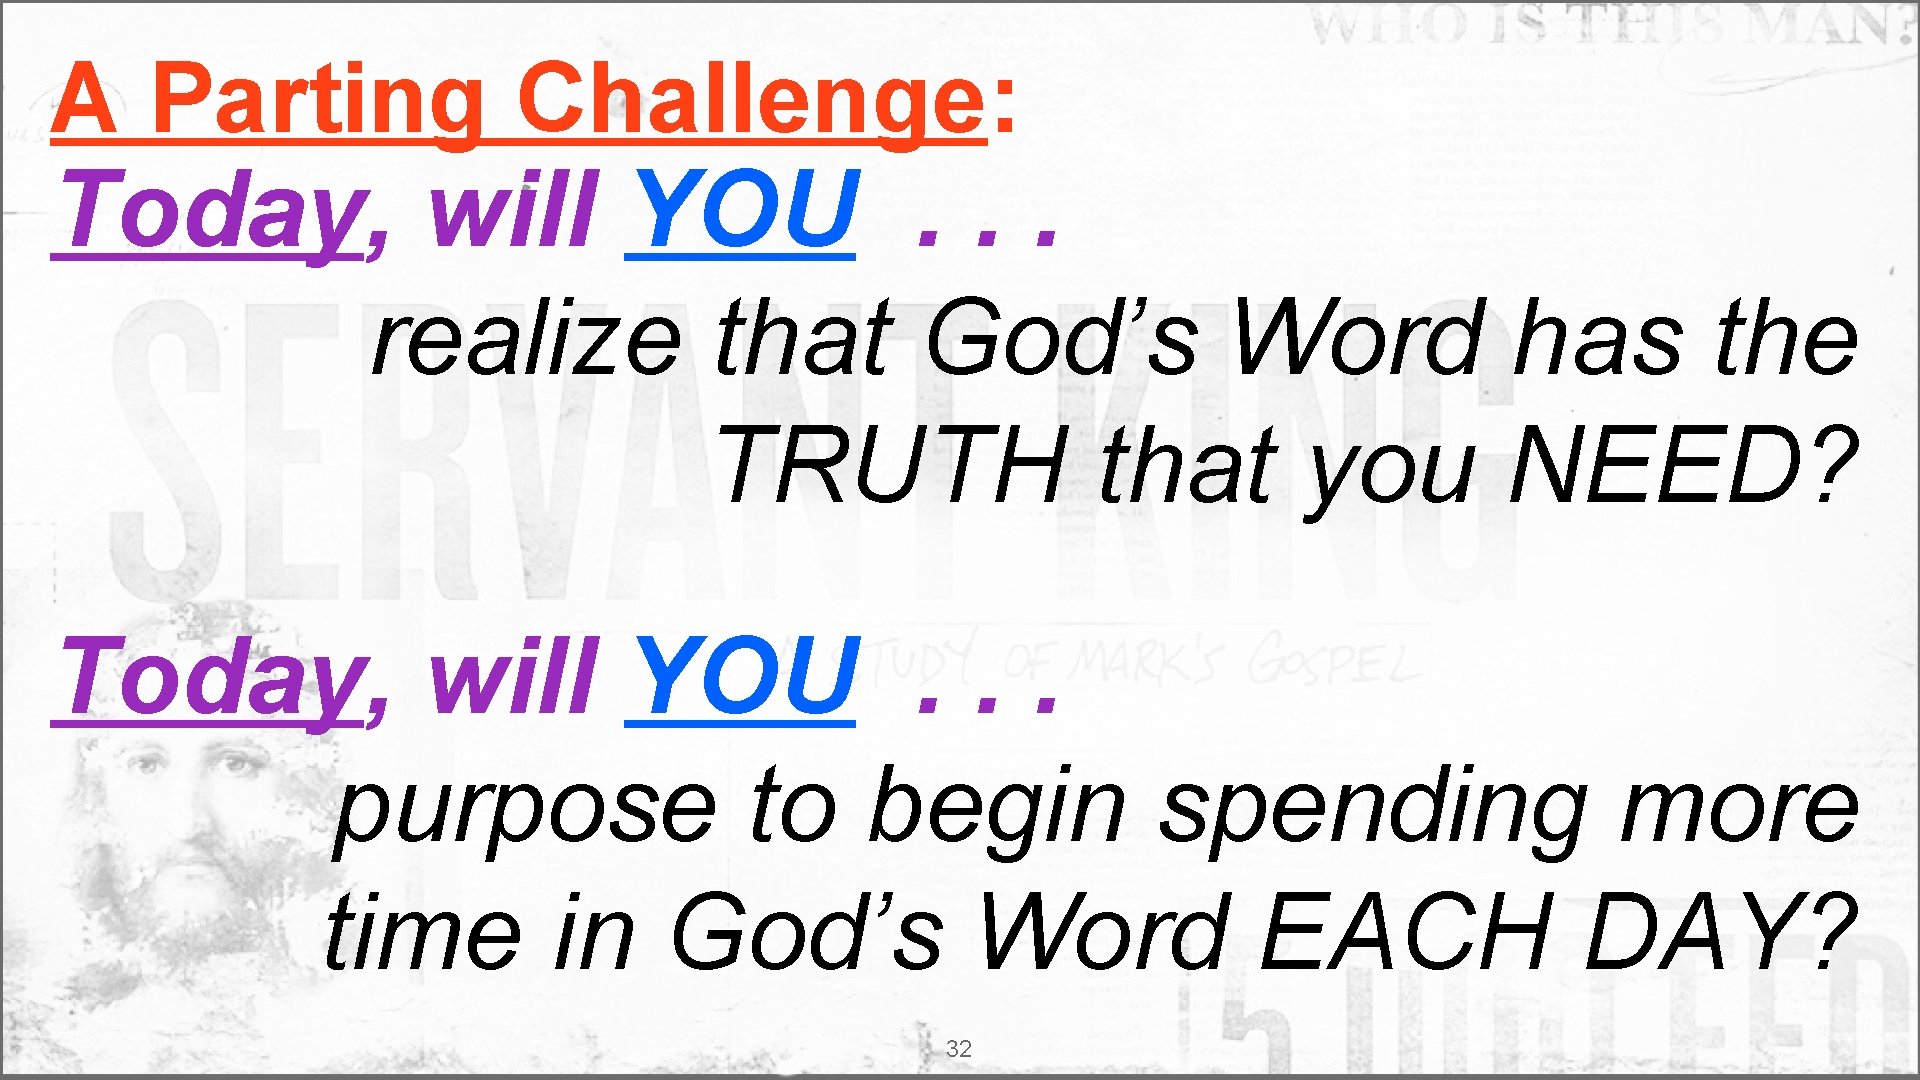 A Parting Challenge: Today, will YOU. . . realize that God’s Word has the